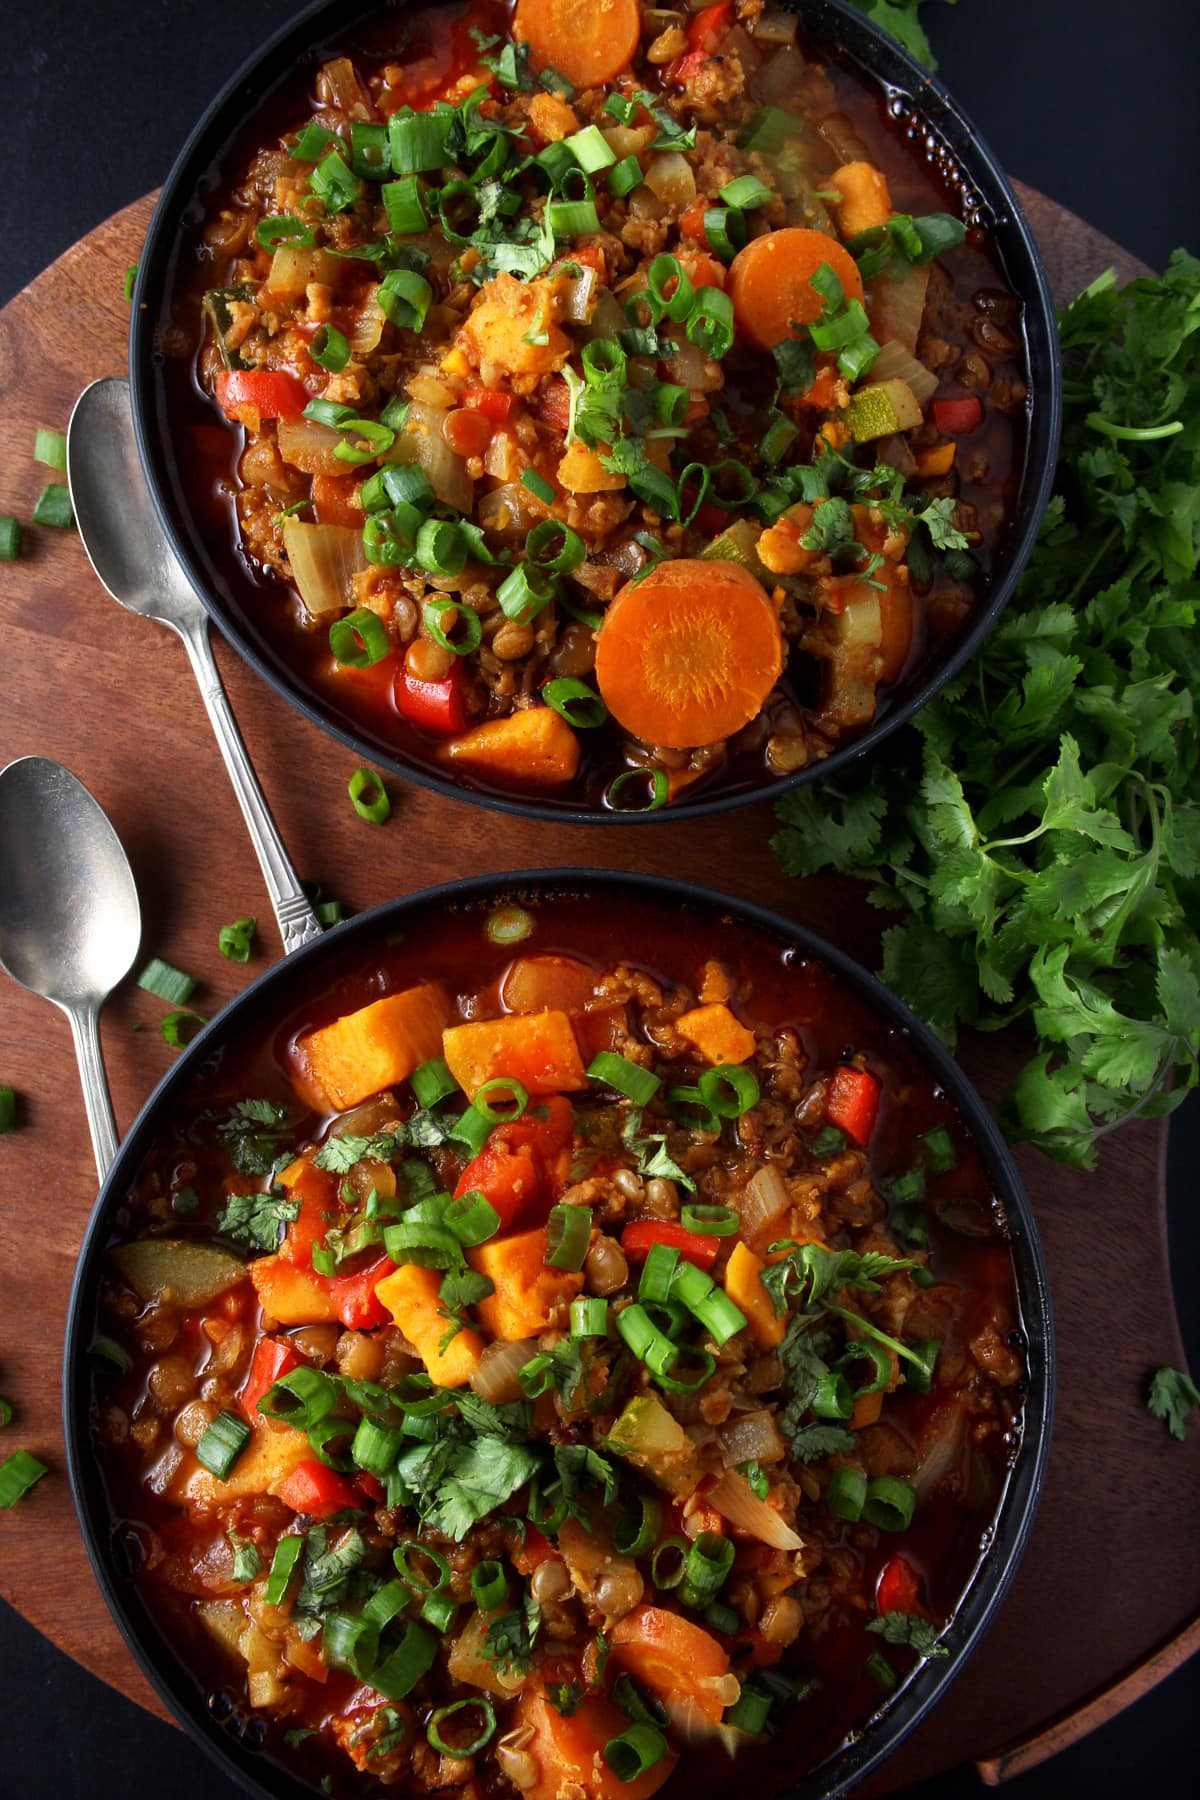 Sometimes you just want comfort food, like this easy vegan chili recipe. Simple to make, this healthy vegan chili is loaded down with a variety of vegetables. But there's a twist: no tomatoes! Completely gluten-free and totally flexible, this chili makes the perfect weeknight dinner. #veganchilirecipe #veganchilieasy #veganchilihealthy #vegansouprecipes #veganweeknightdinners #easyveganrecipes #bohemianvegankitchen